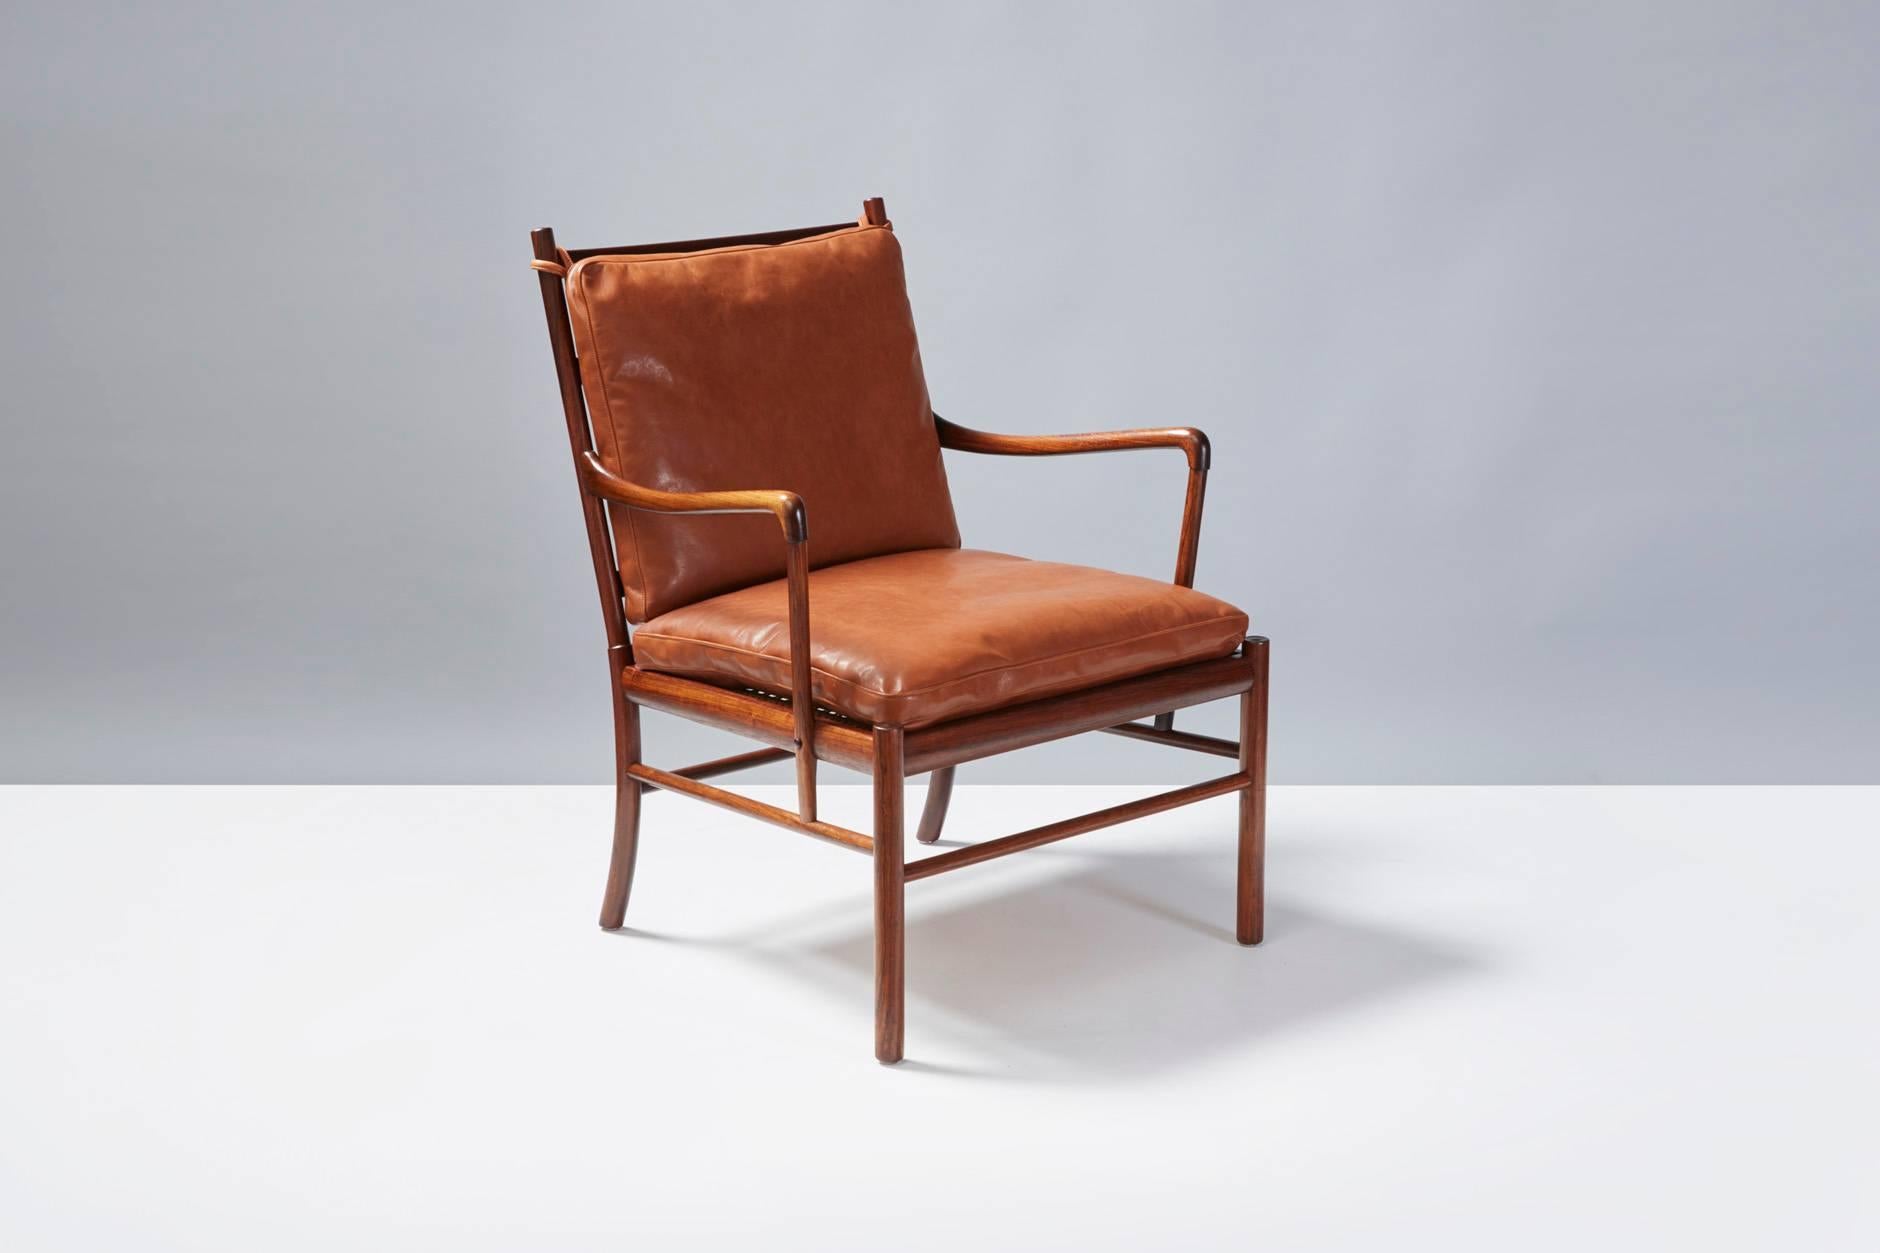 One of Danish master Ole Wanscher's finest creations. The colonial chair was inspired by British and French 19th century furniture styles. This rosewood armchair has a removable woven cane seat. The loose cushions are covered in new aniline brown